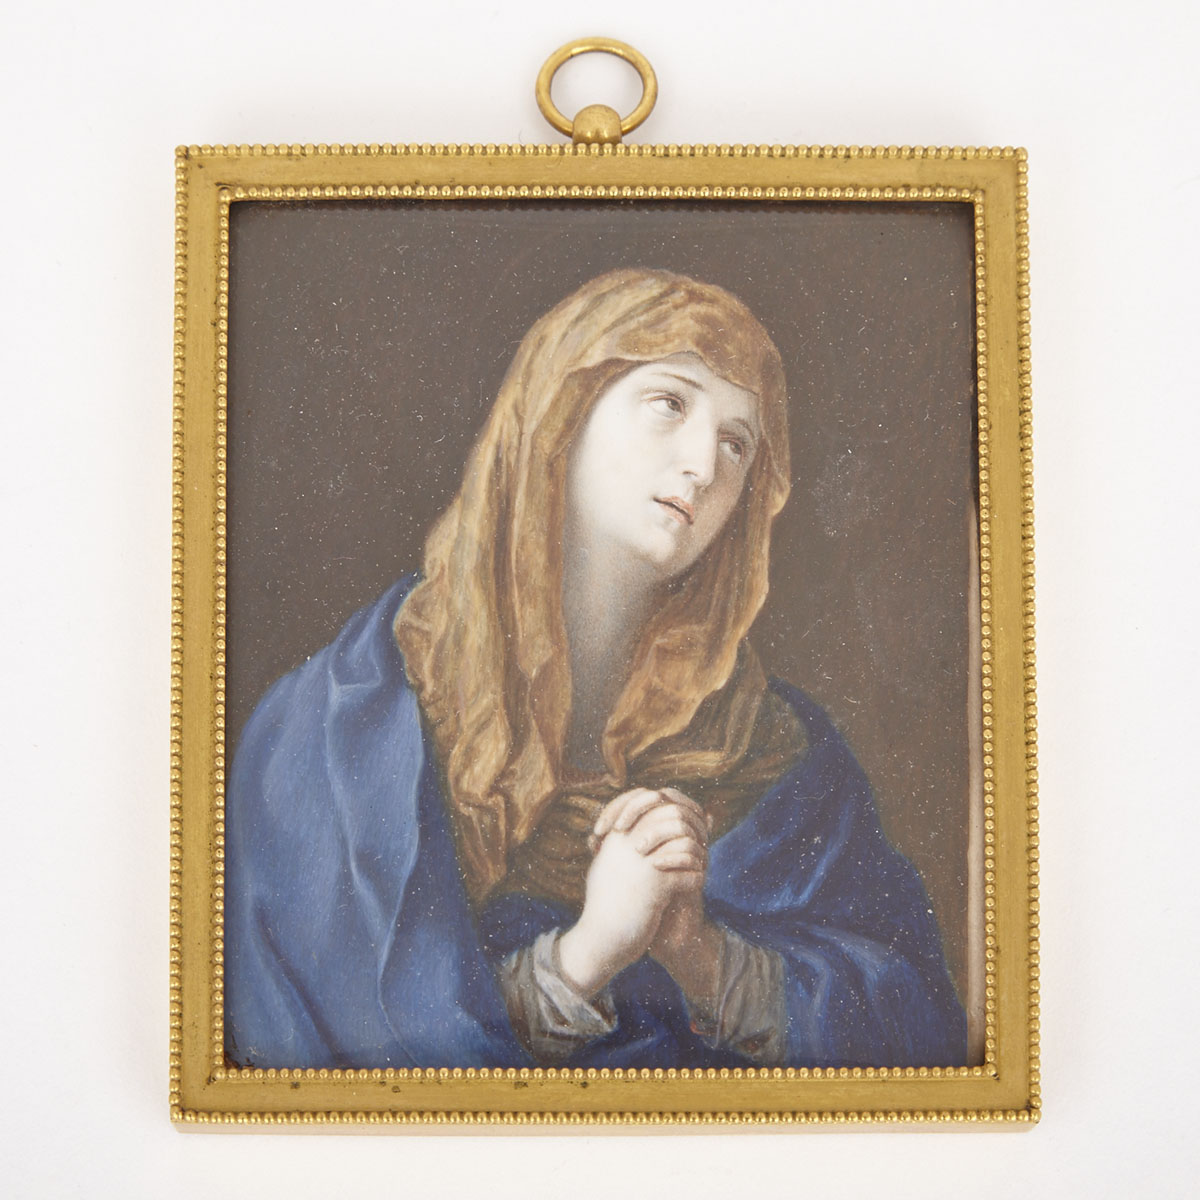 Italian School Portrait Miniature on Ivory of the Mater Delorosa (Our Lady of Sorrows), Mid 20th century